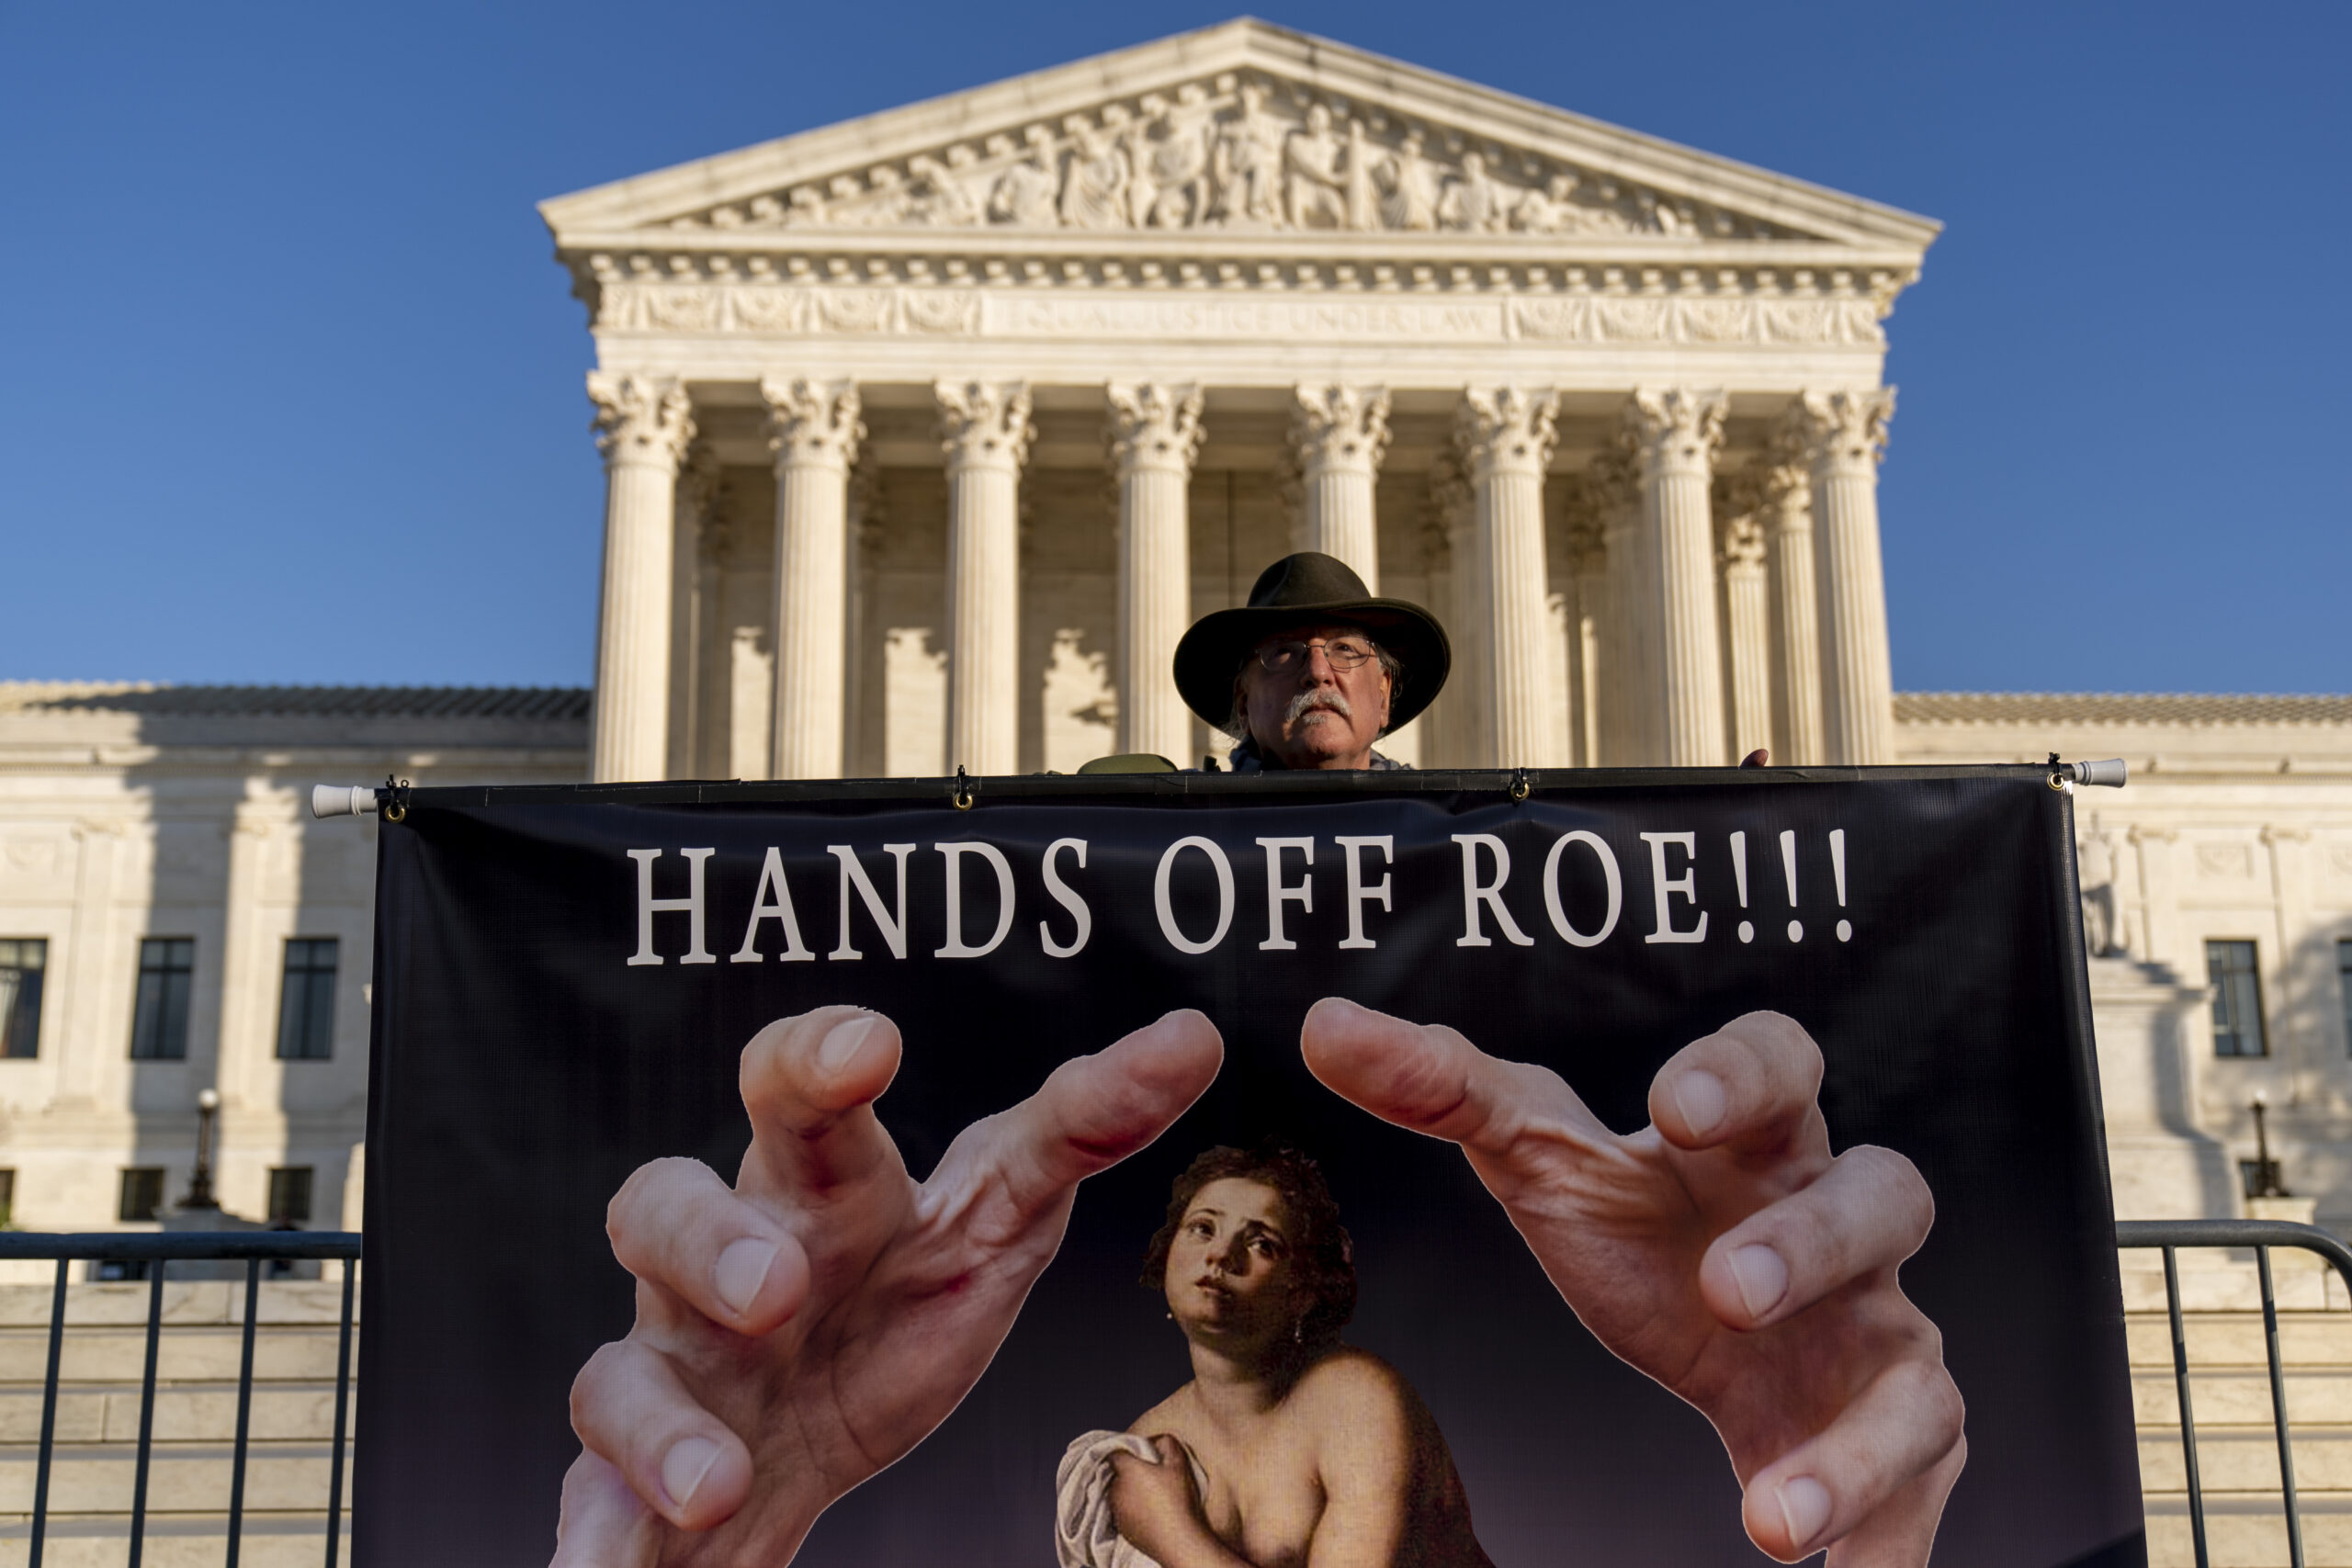 Stephen Parlato of Boulder, Colo., holds a sign that reads "Hands Off Roe!!!" outside of the Supreme Court in Washington, Tuesday, Nov. 30, 2021, as activists begin to arrive ahead of arguments on abortion at the court in Washington.(AP Photo/Andrew Harnik)